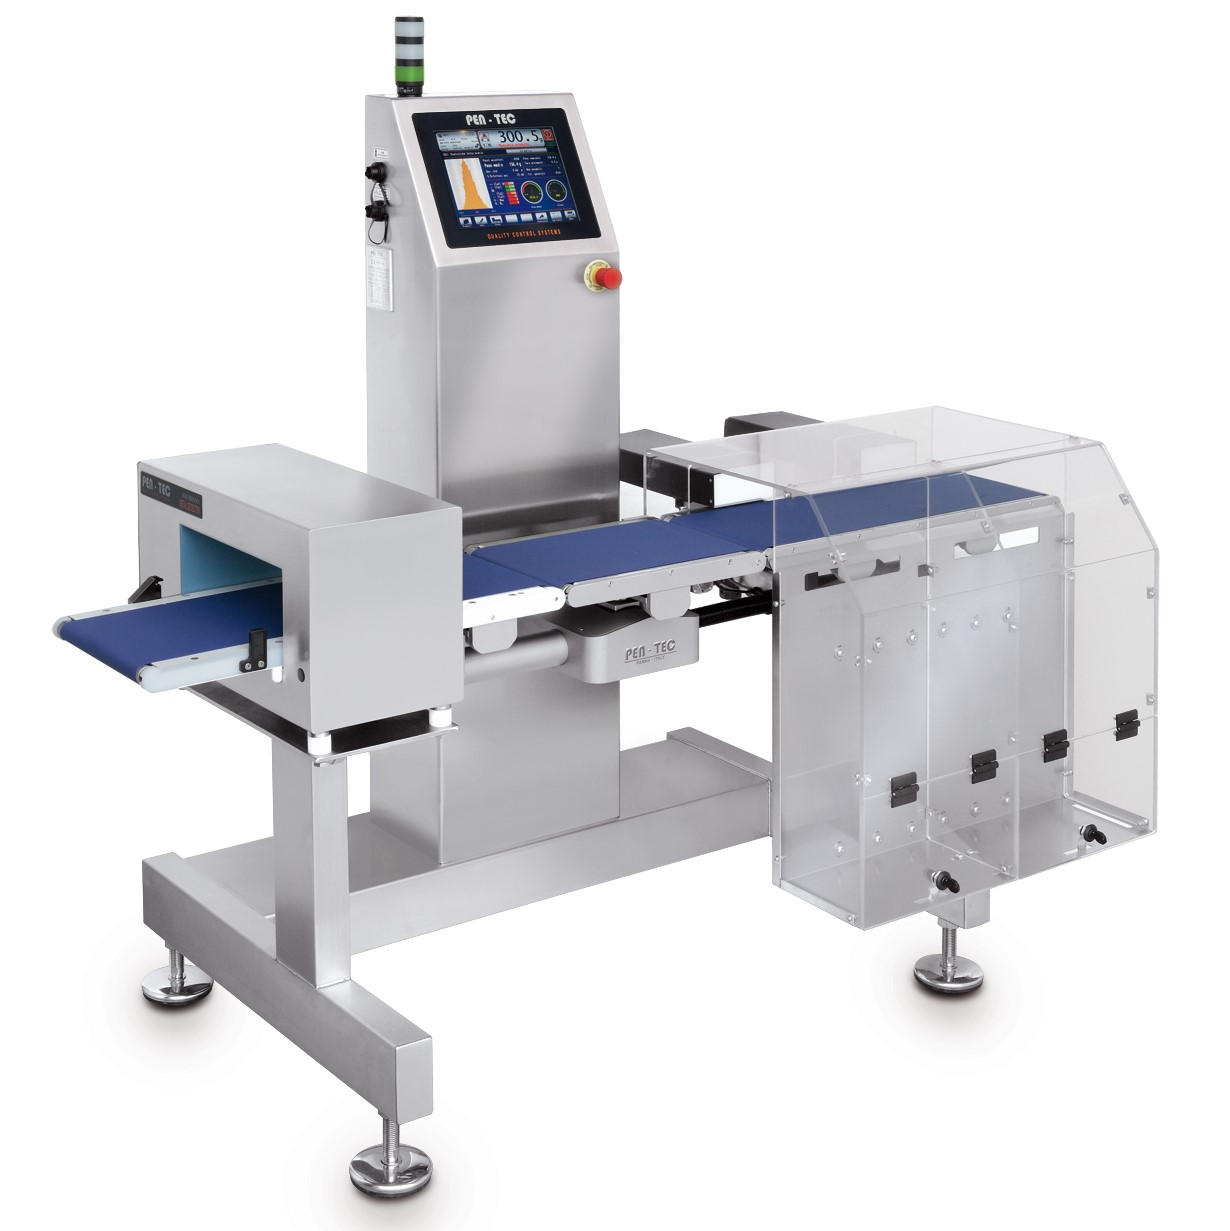 Image of the Pen-Tec MSR1200C Metal Detector Checkweigher